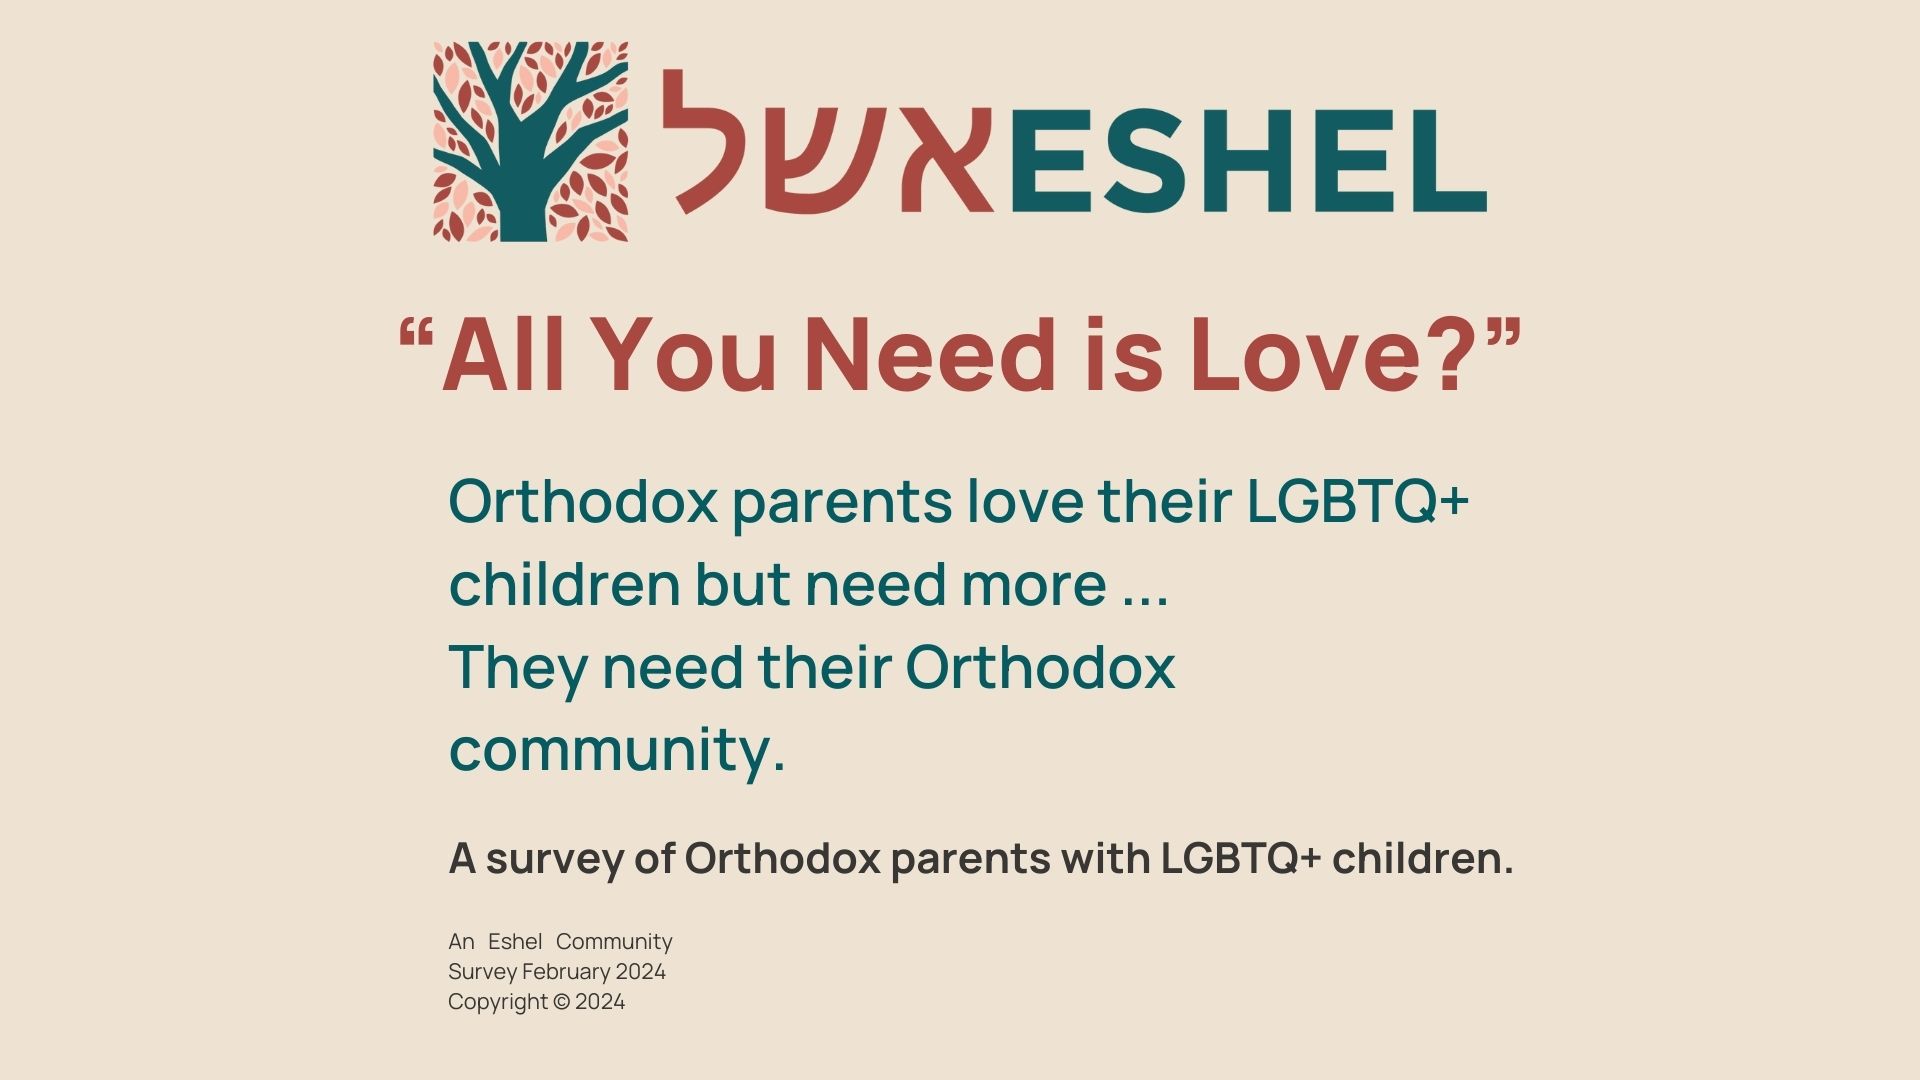 “All You Need is Love?” Orthodox parents love their LGBTQ+ children but need more ...They need their Orthodox community. A survey of Orthodox parents with LGBTQ+ children. 